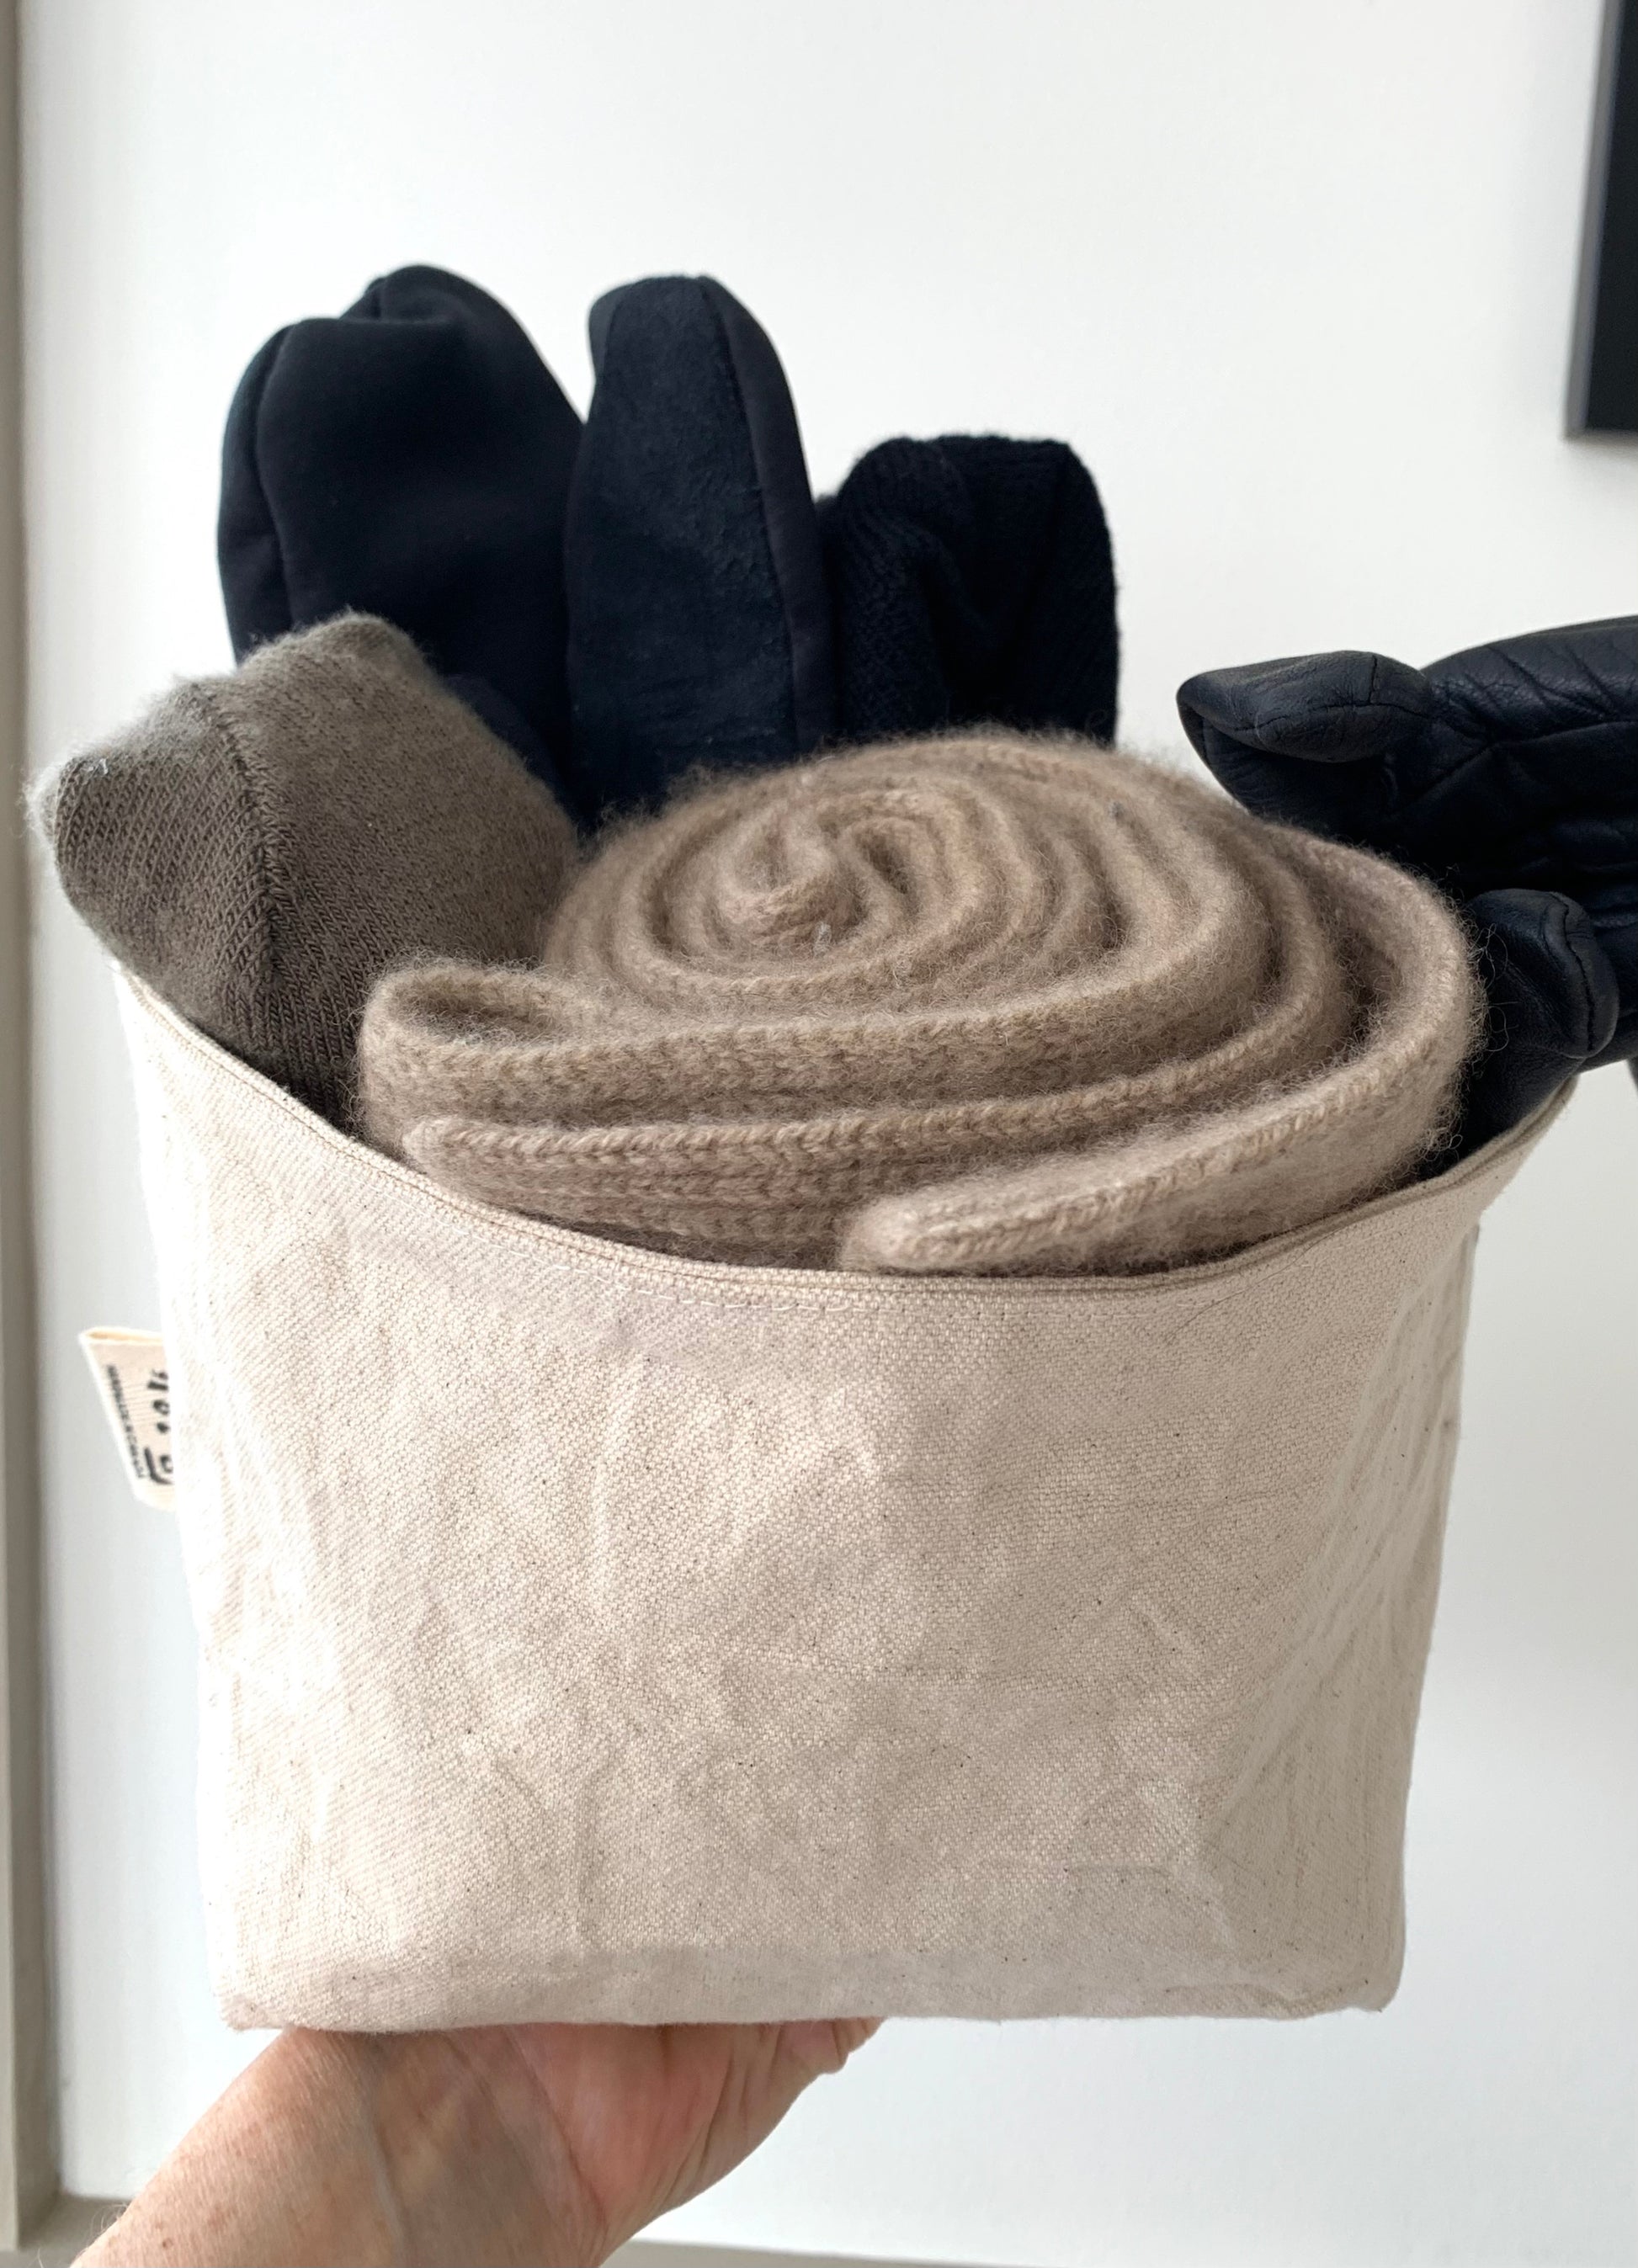 The large bucket filled with a rolled scarf, gloves and a hat